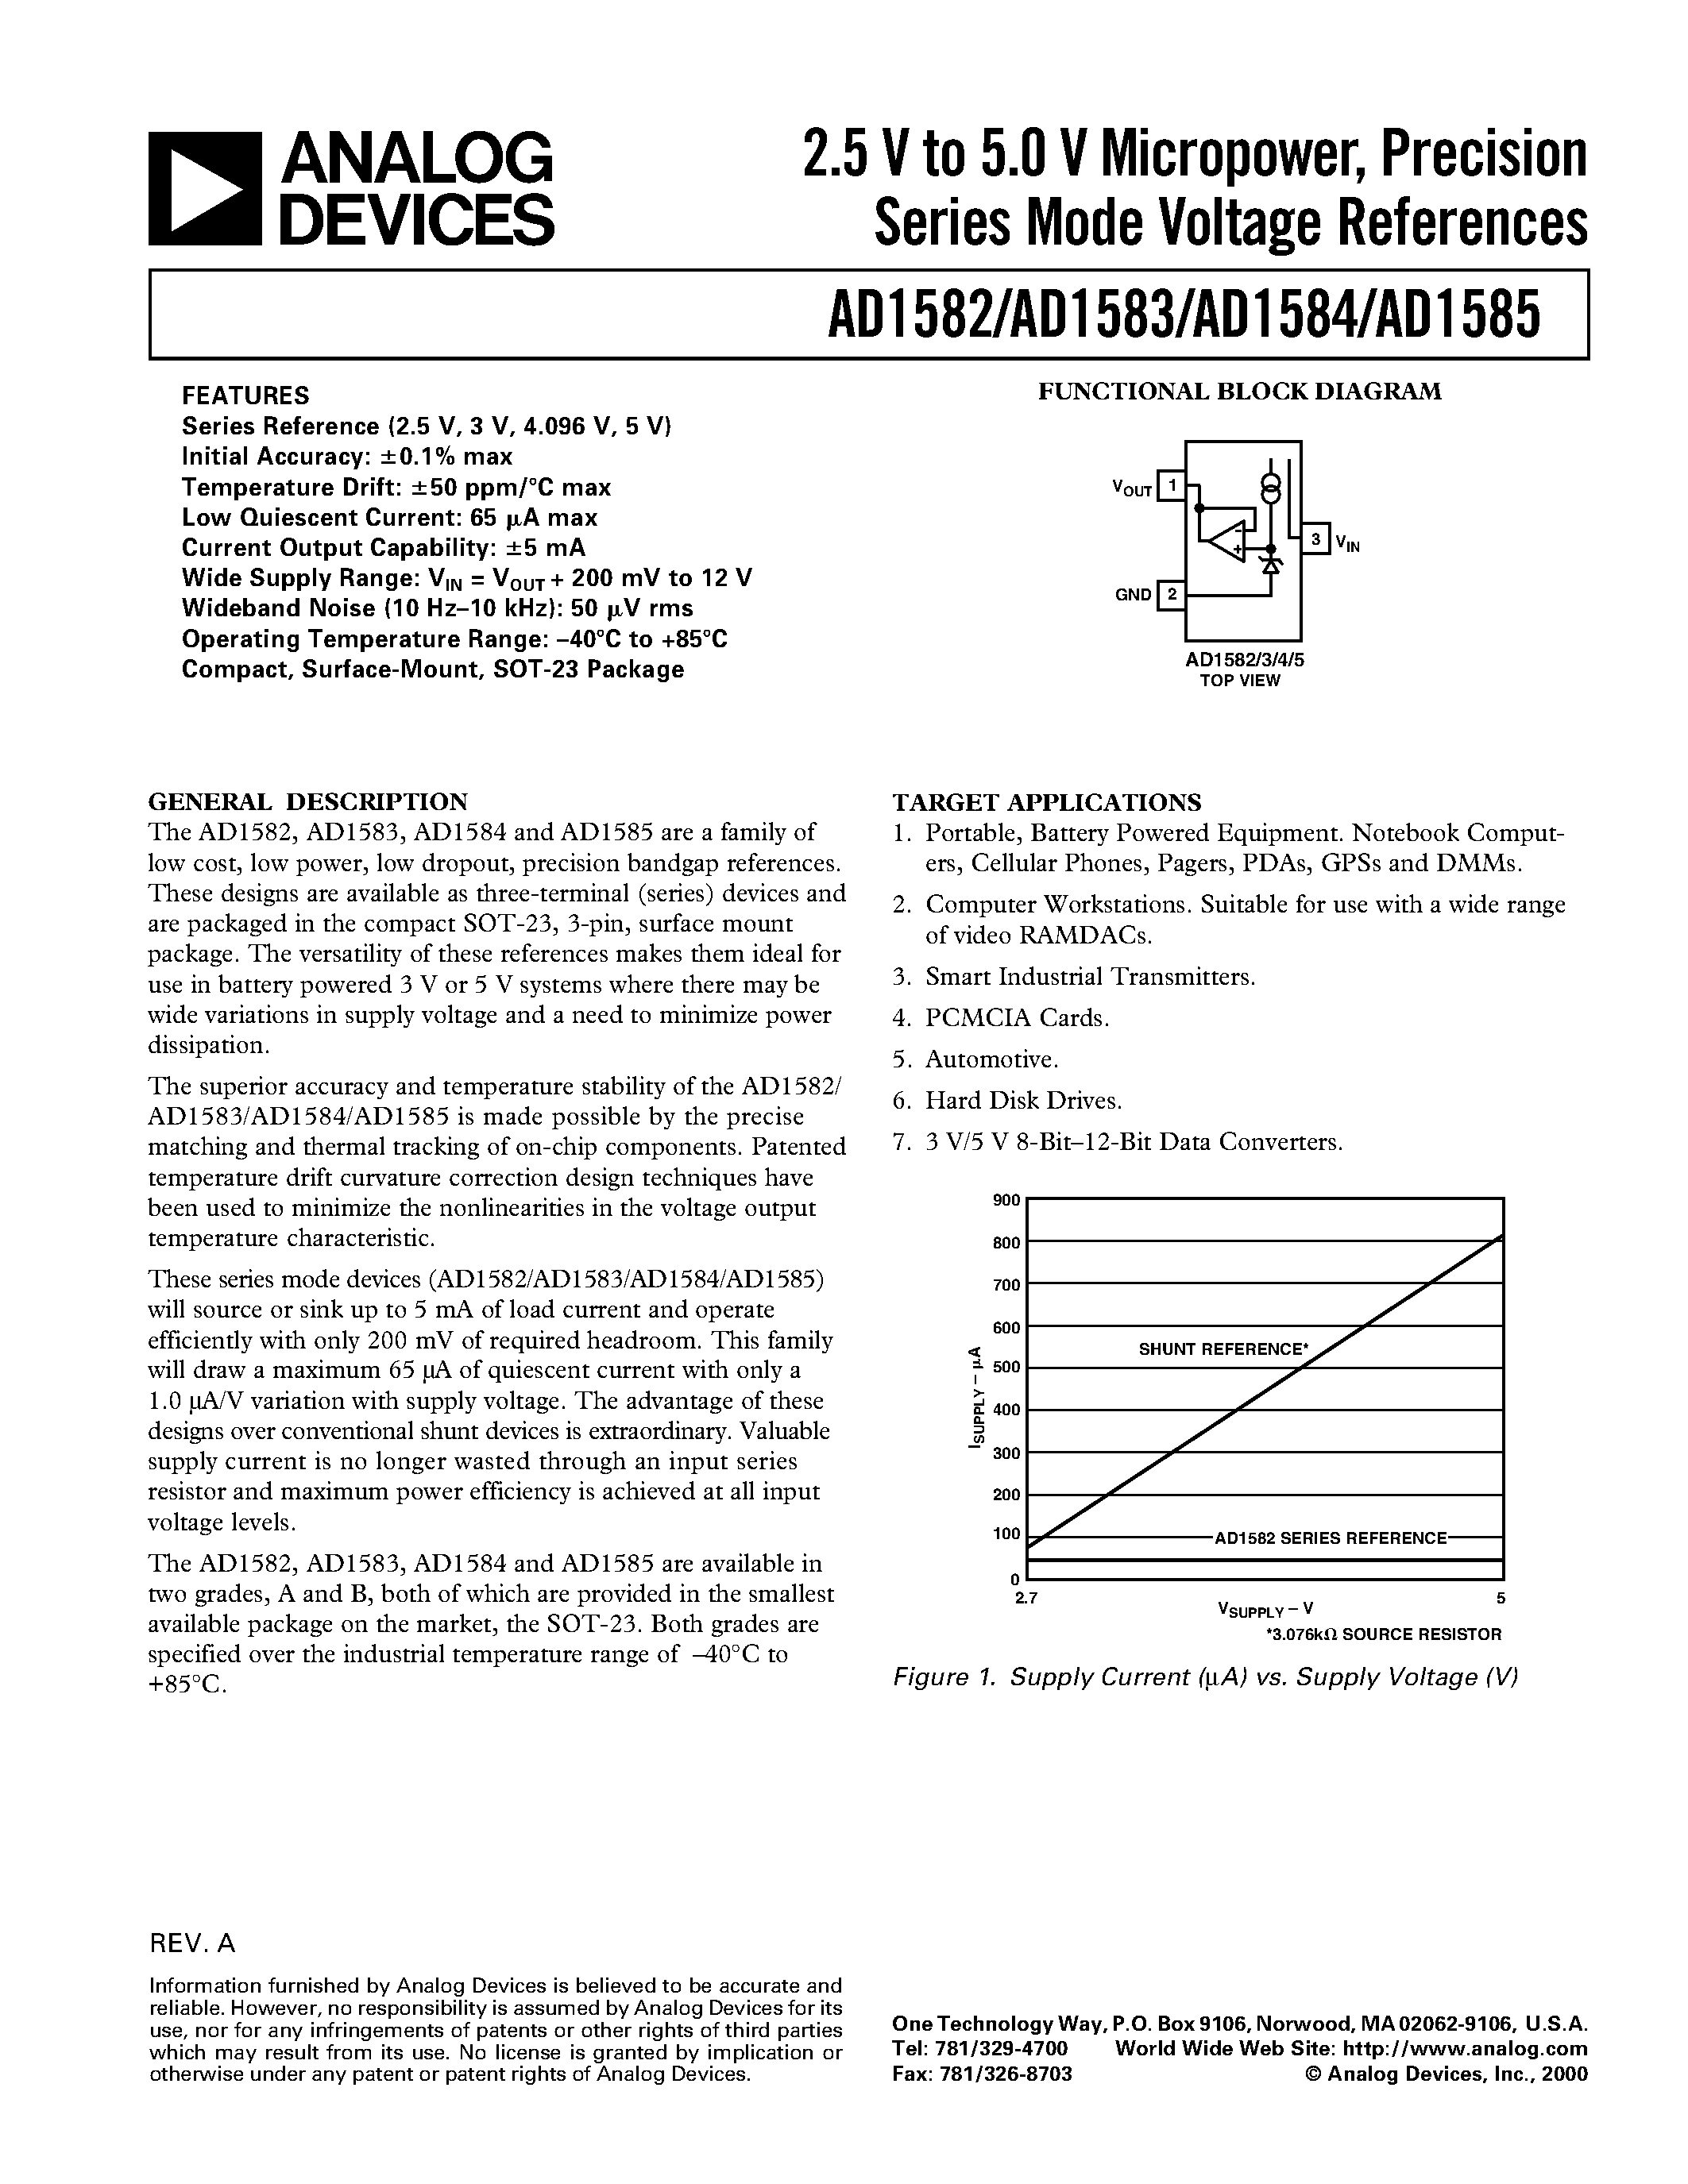 Datasheet AD1585BRTRL7 - 2.5 V to 5.0 V Micropower/ Precision Series Mode Voltage References page 1